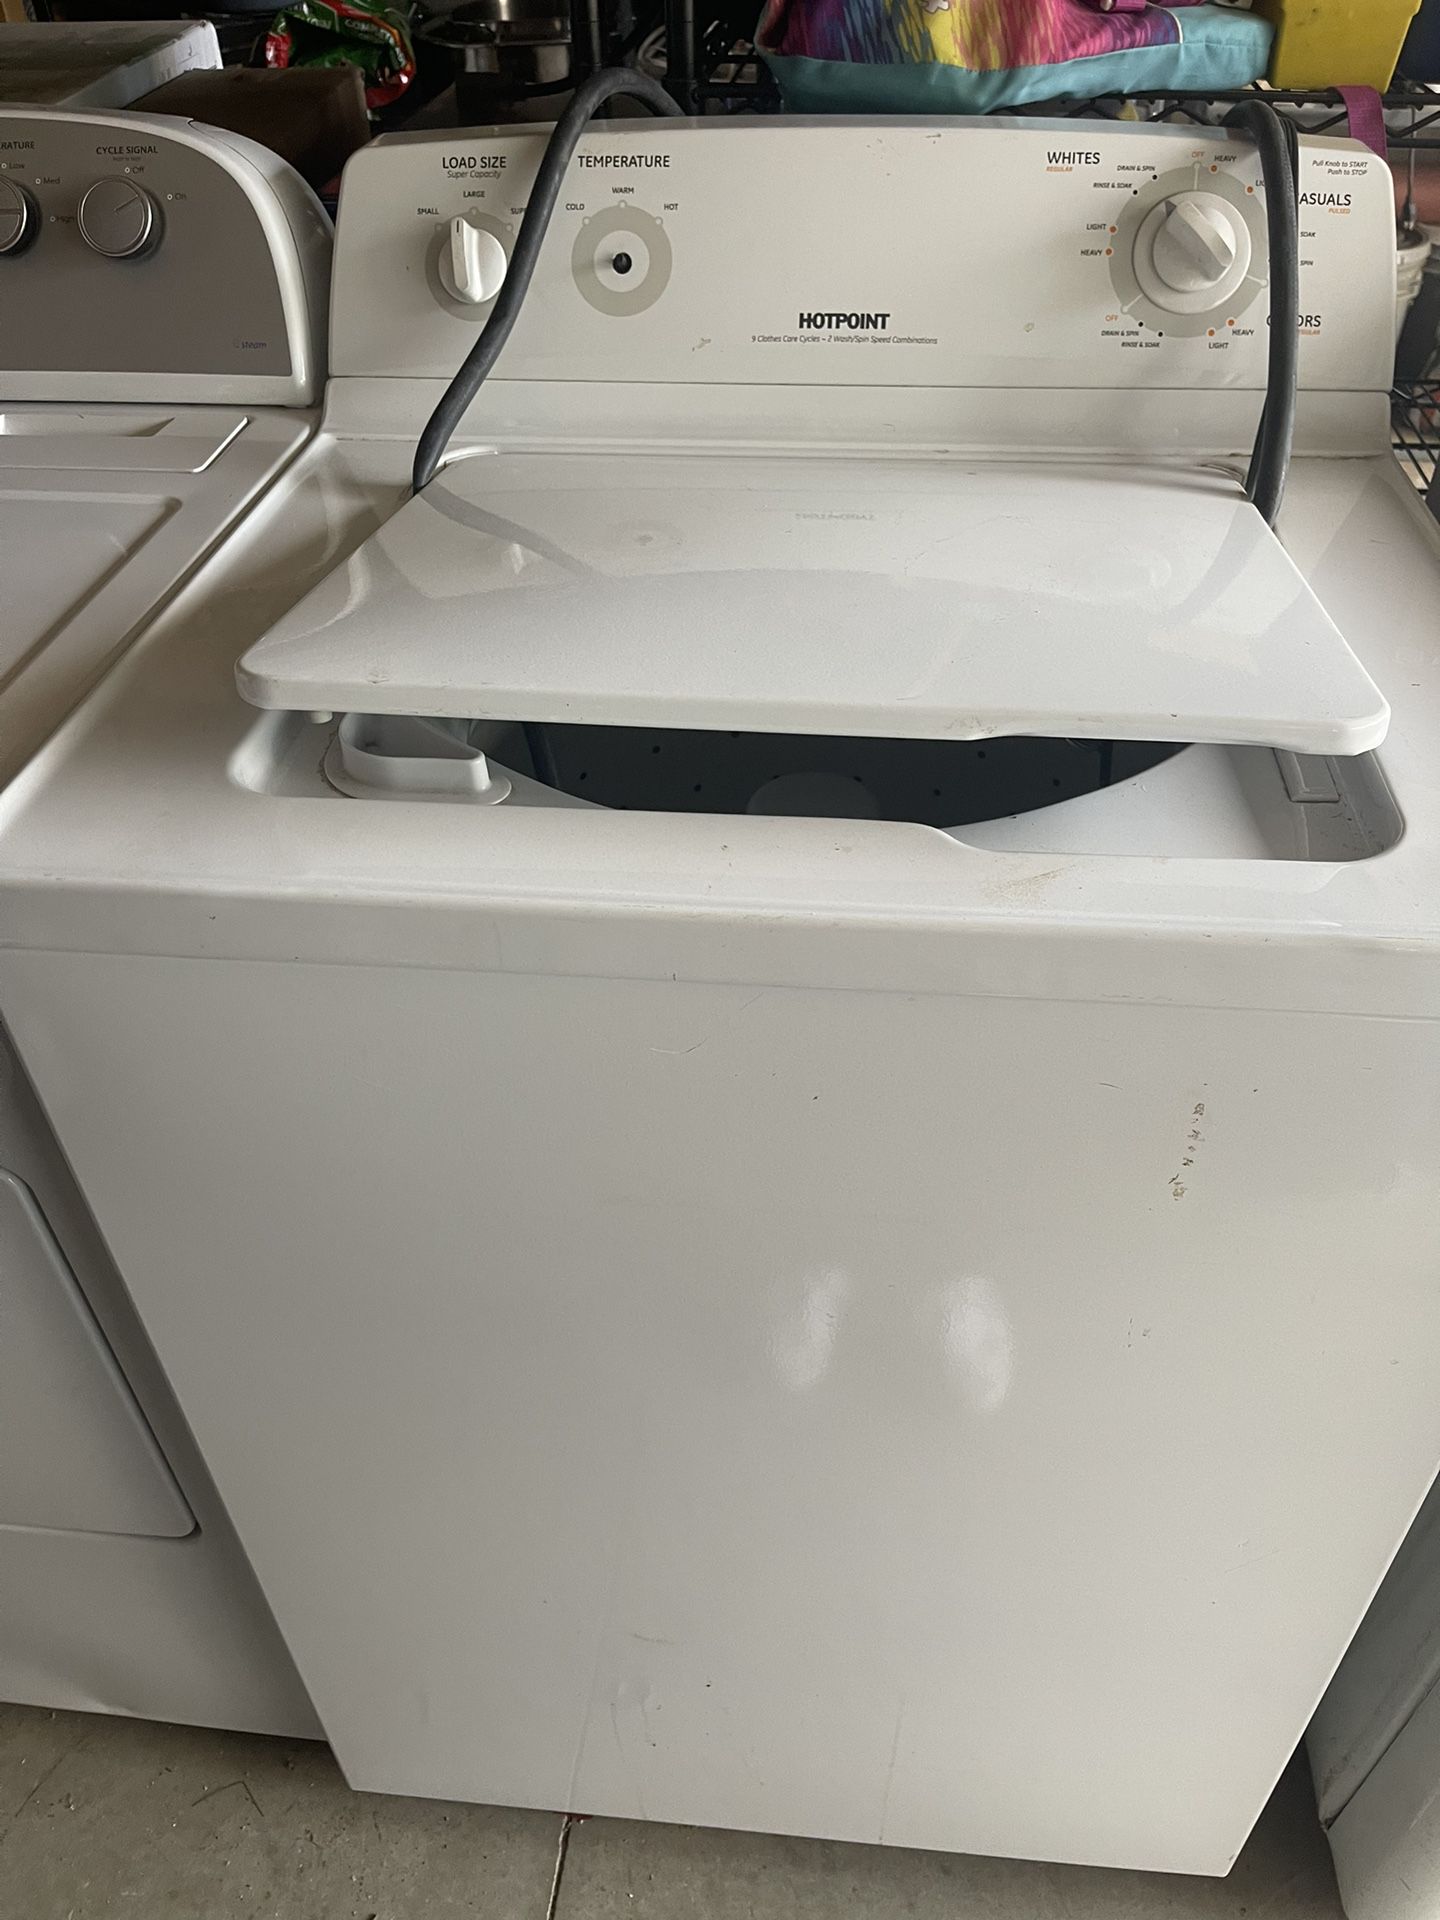 Hot Point Washer And Kenmore Dryer